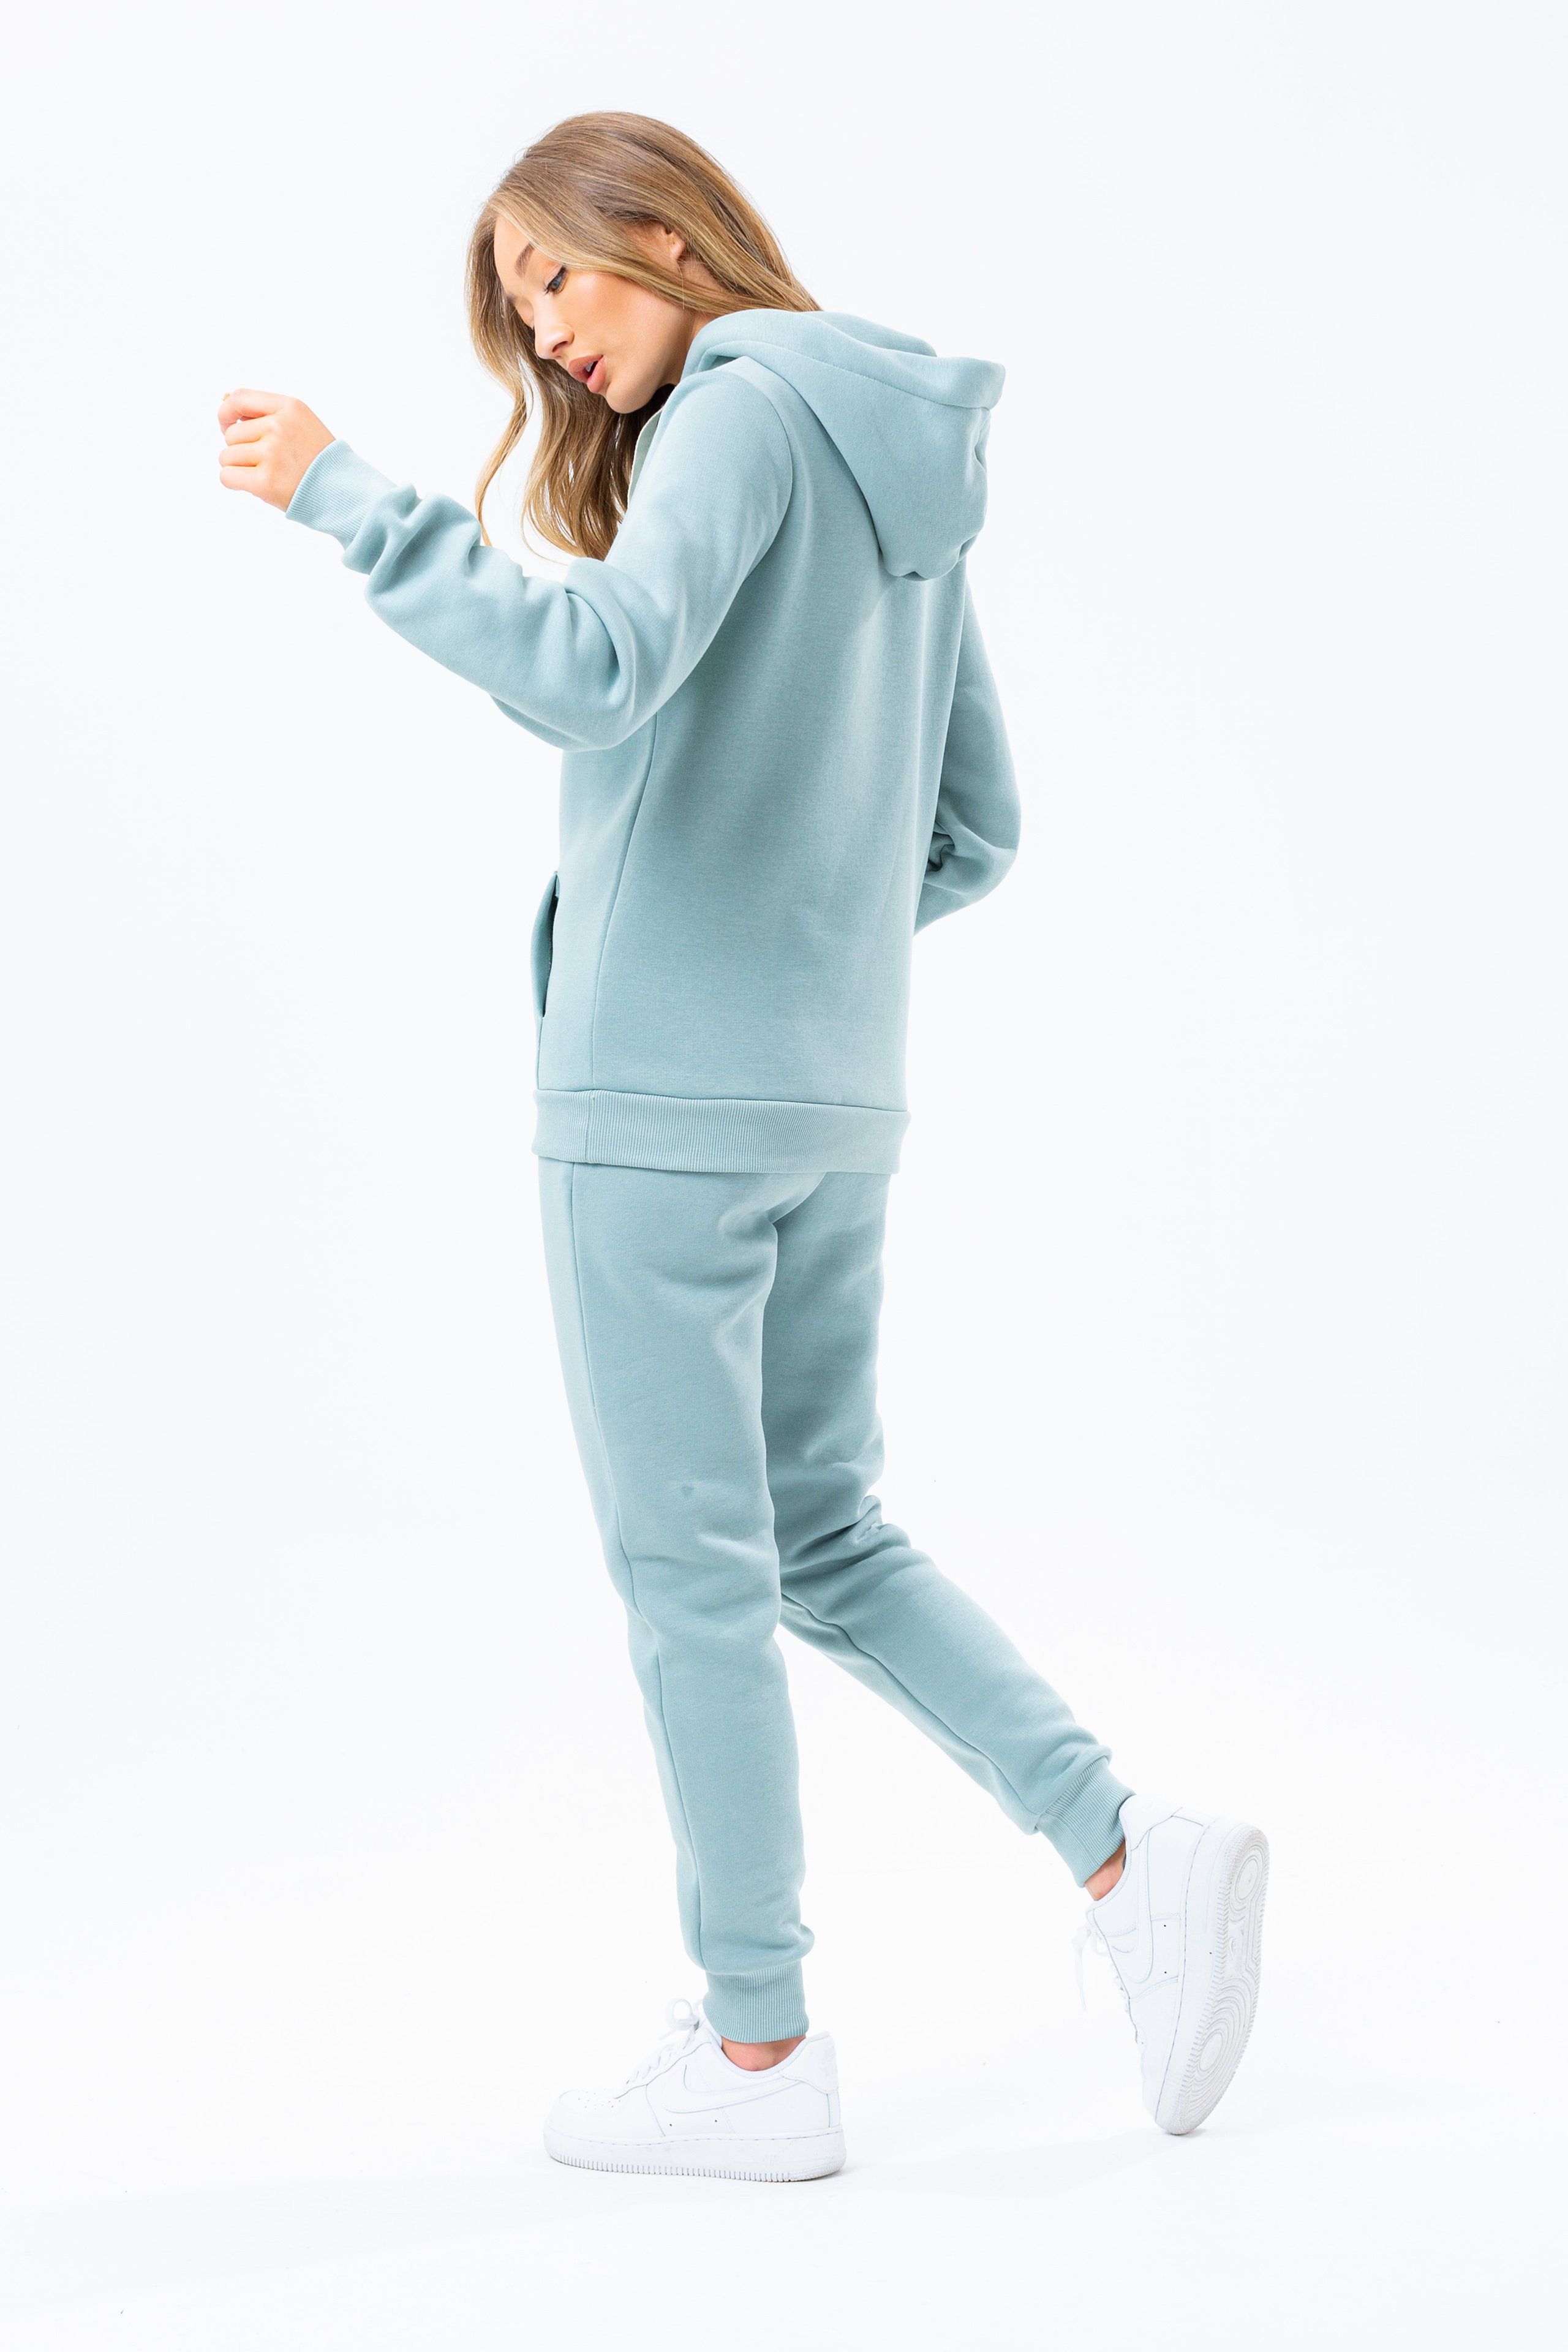 The HYPE. sage drawstring women's joggers are perfectly matched with the HYPE. sage drawstring women's hoodie to complete the look. Or opt for a cute contrasting white crop tee. Designed in 65% cotton and 35% polyester for an unreal amount of comfort. With an elasticated waistband and woven embossed drawstrings, these essential women's joggers are the perfect addition to your jogger 'drobe. Available in UK sizes from 4 to 20. Machine wash at 30 degrees.